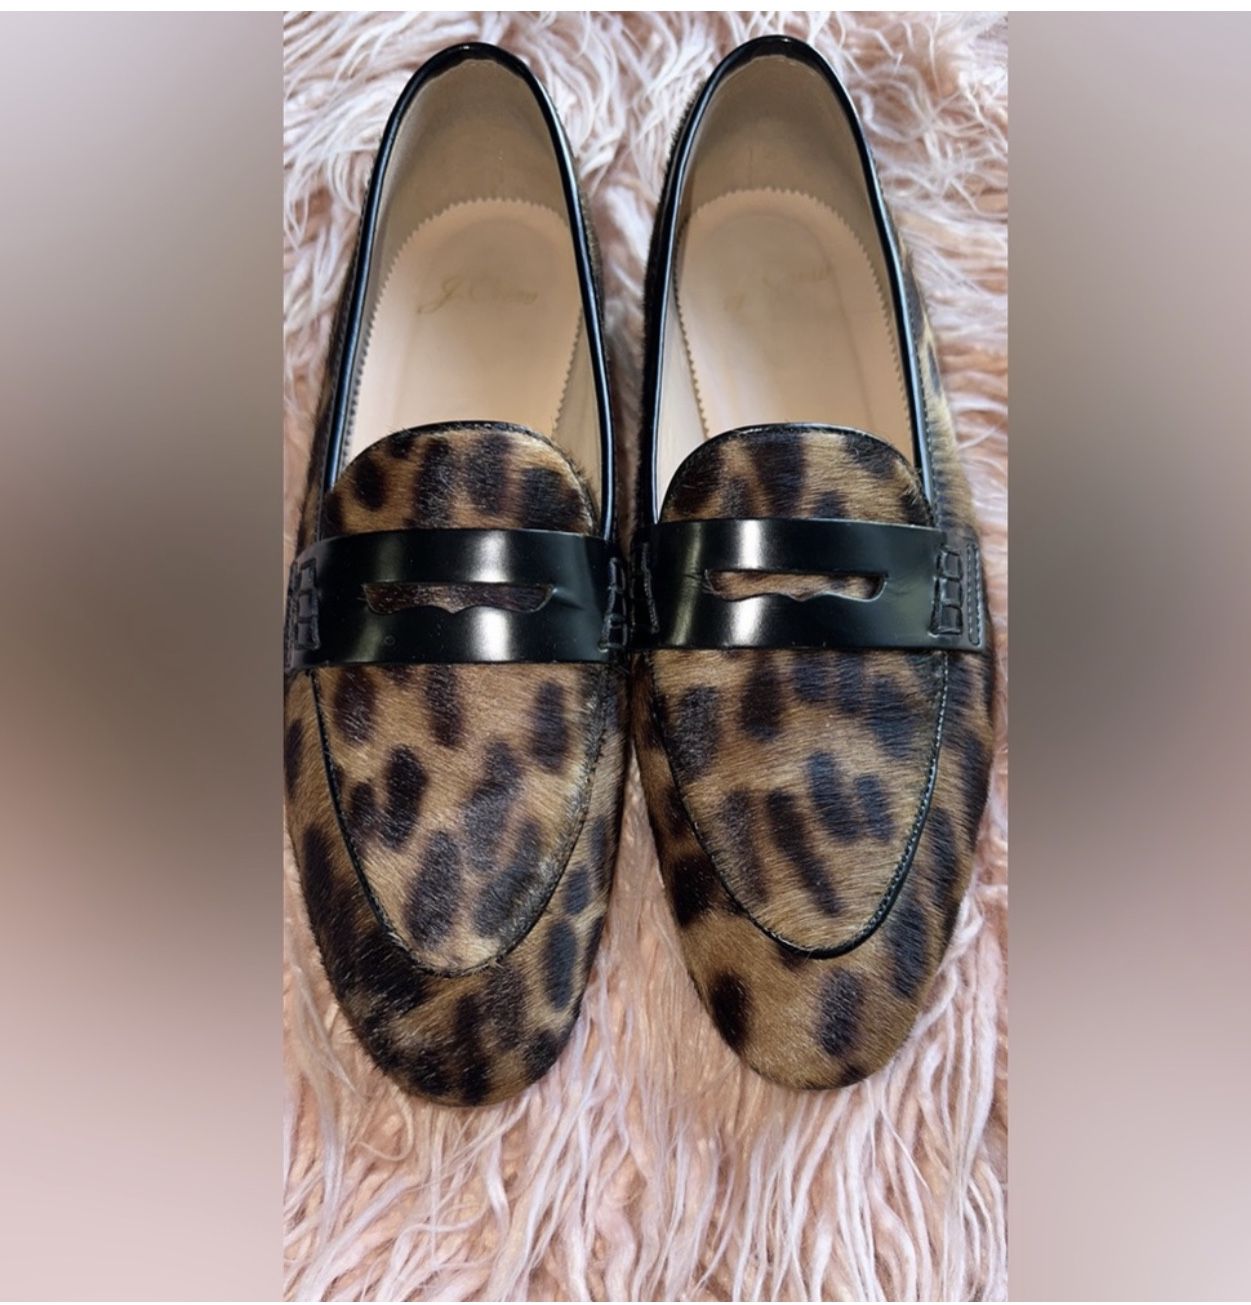 J.Crew Academy Penny Leopard Calf Hair for Sale in Indianapolis, IN - OfferUp